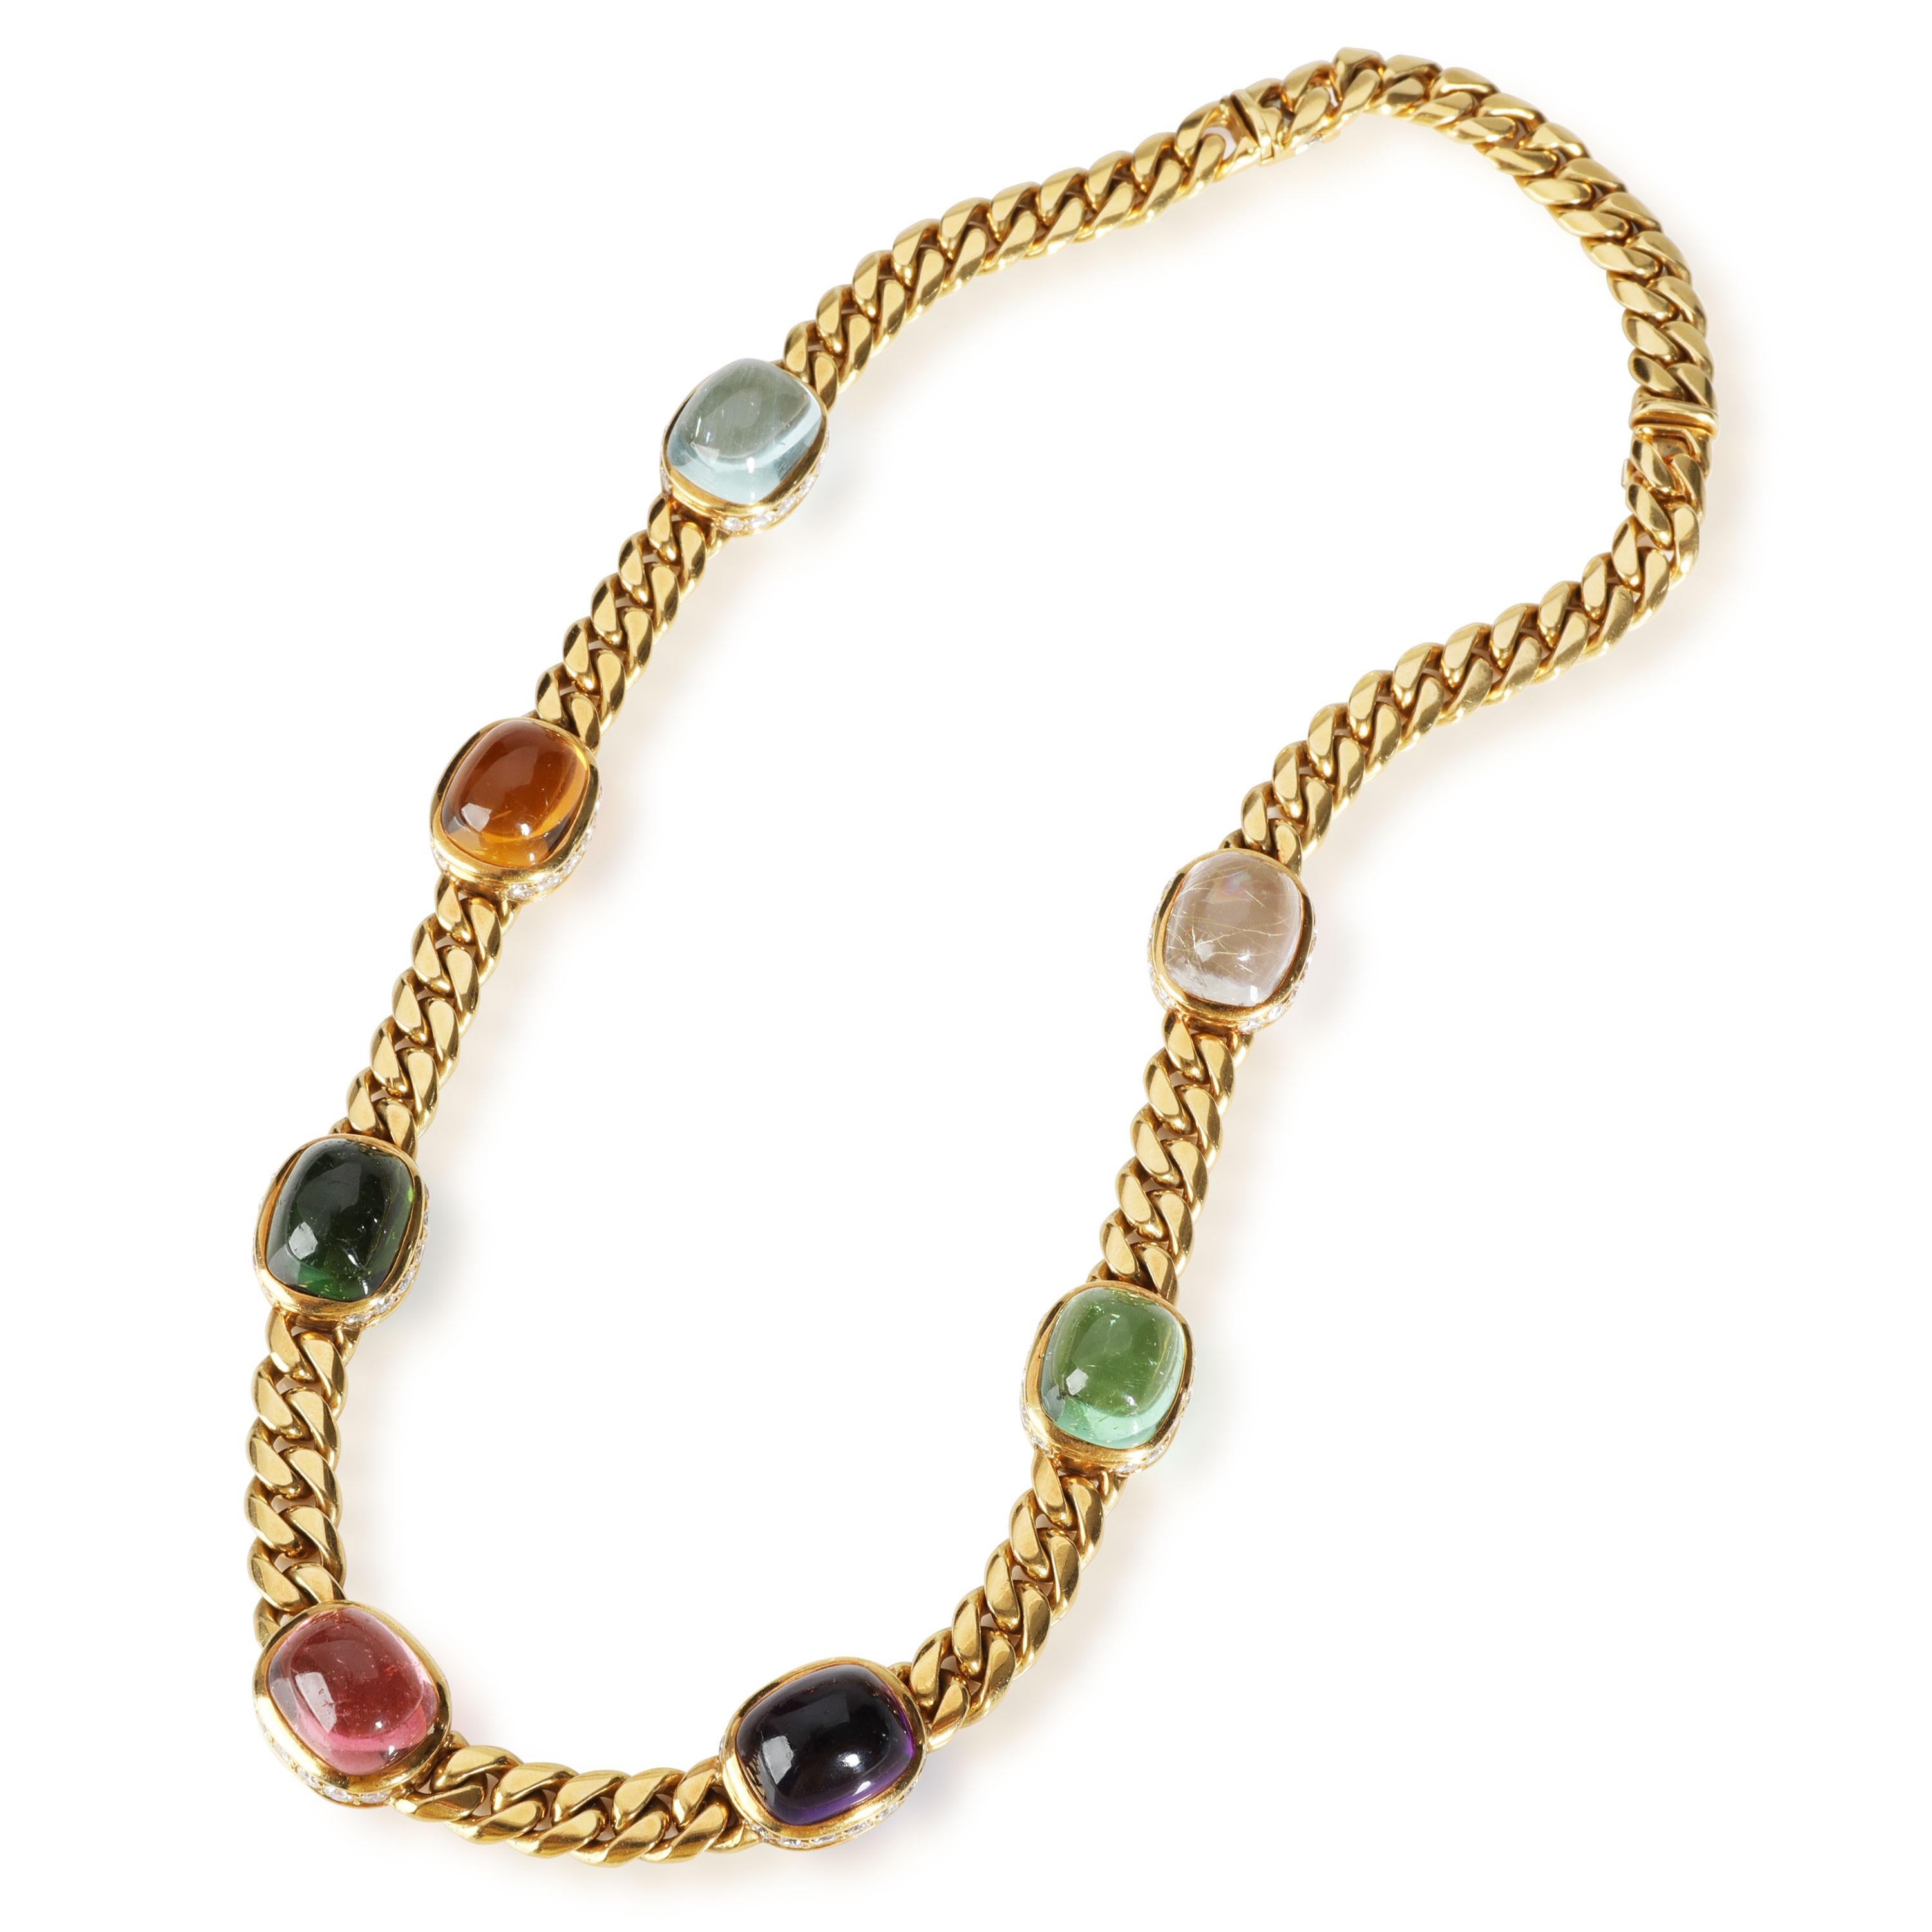 
Bvlgari Seven Station Mixed Cabochon Gemstone Necklace in 18K Yellow Gold 5 CTW

PRIMARY DETAILS
SKU: 111469
Listing Title: Bvlgari Seven Station Mixed Cabochon Gemstone Necklace in 18K Yellow Gold 5 CTW
Condition Description: Retails for 50,000